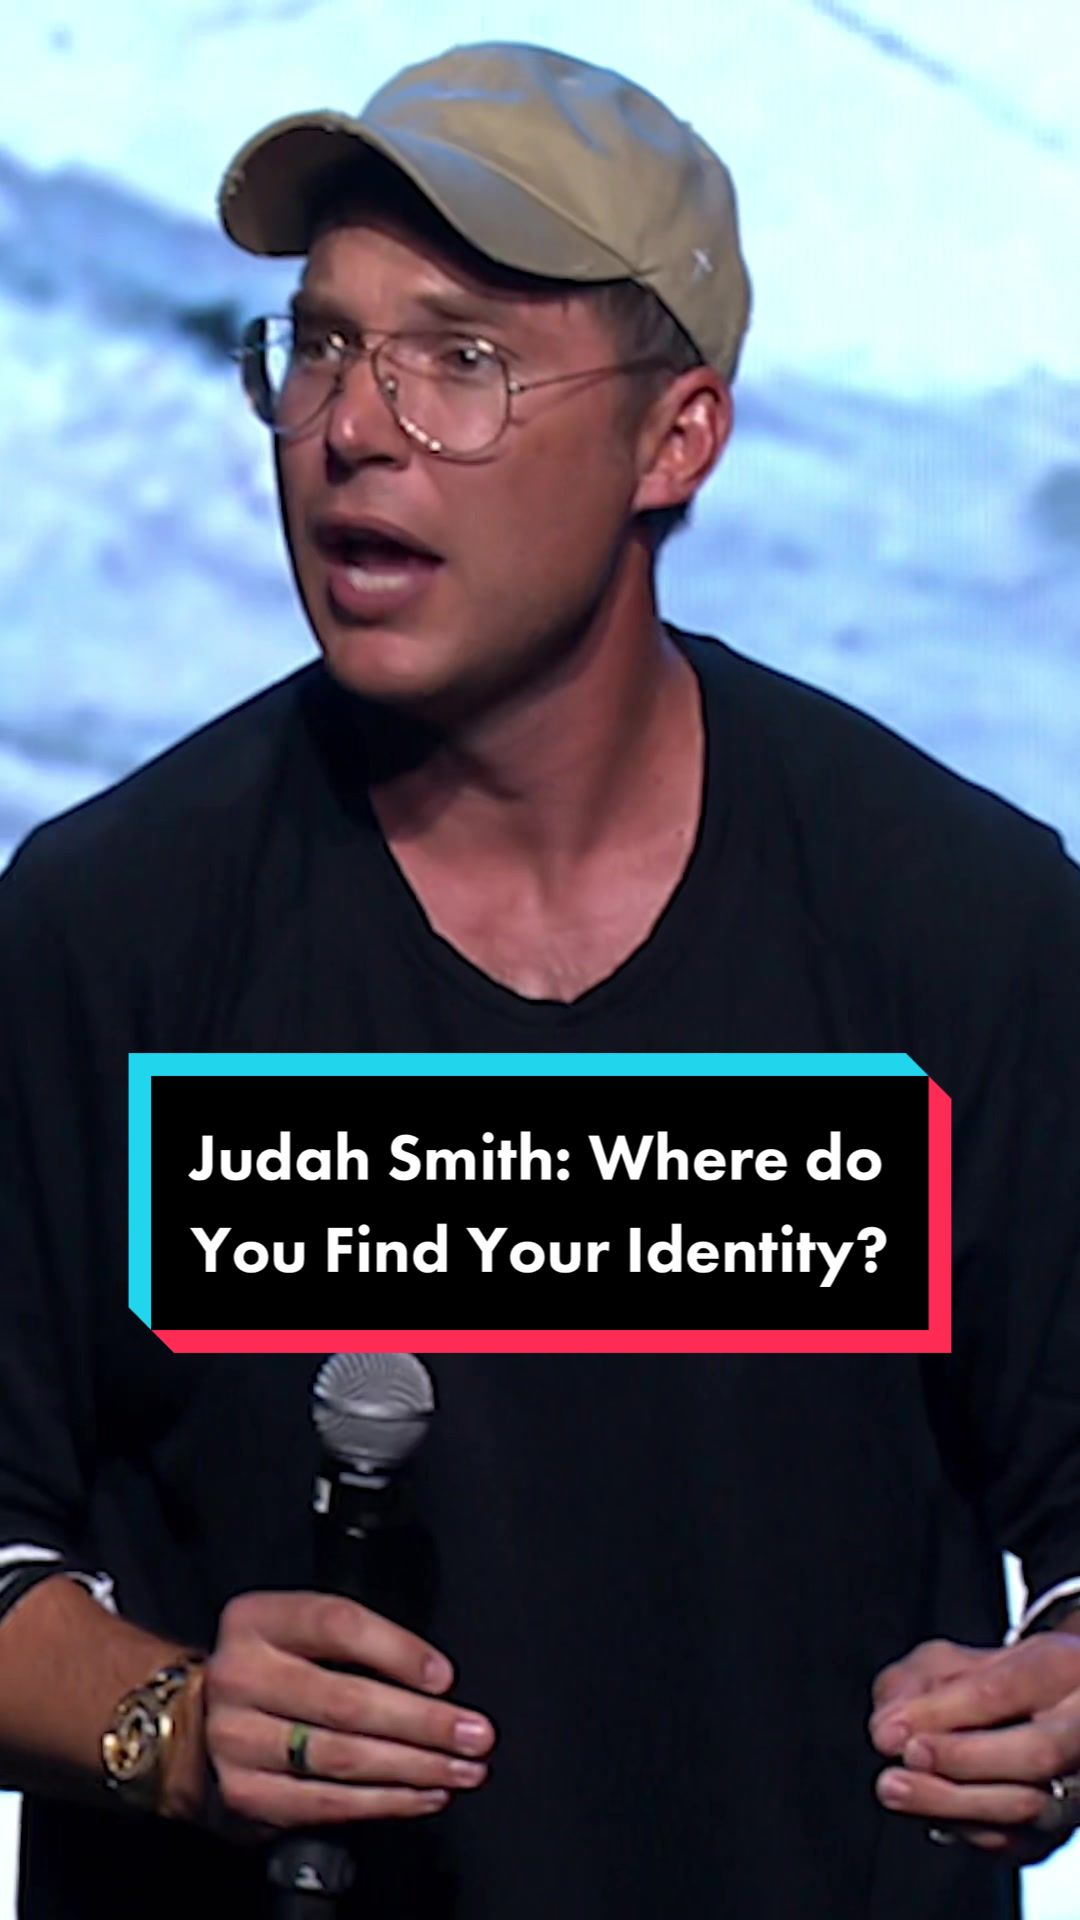 Where do you find your identity?